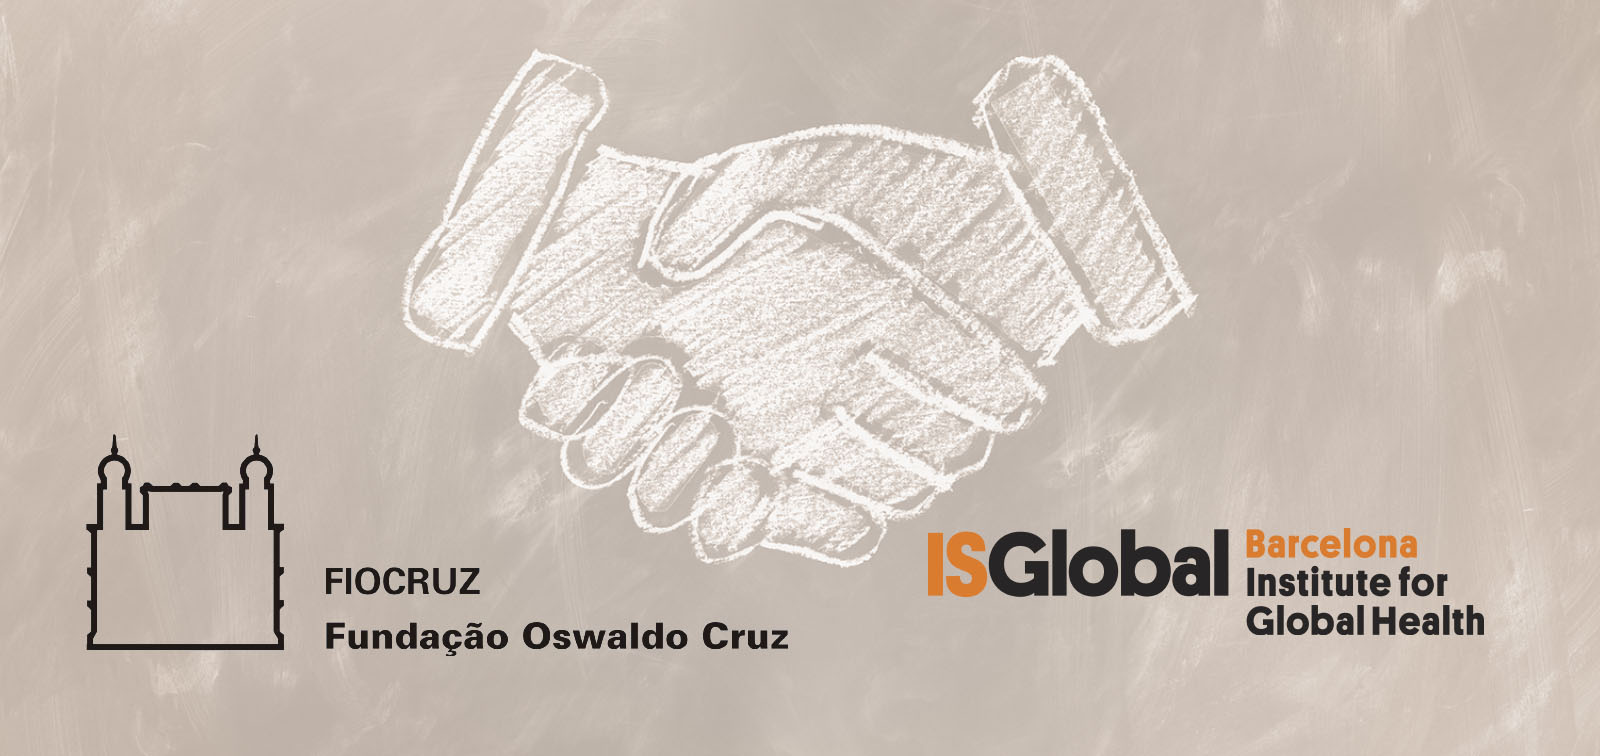 ISGlobal signs collaboration agreement with Fiocruz